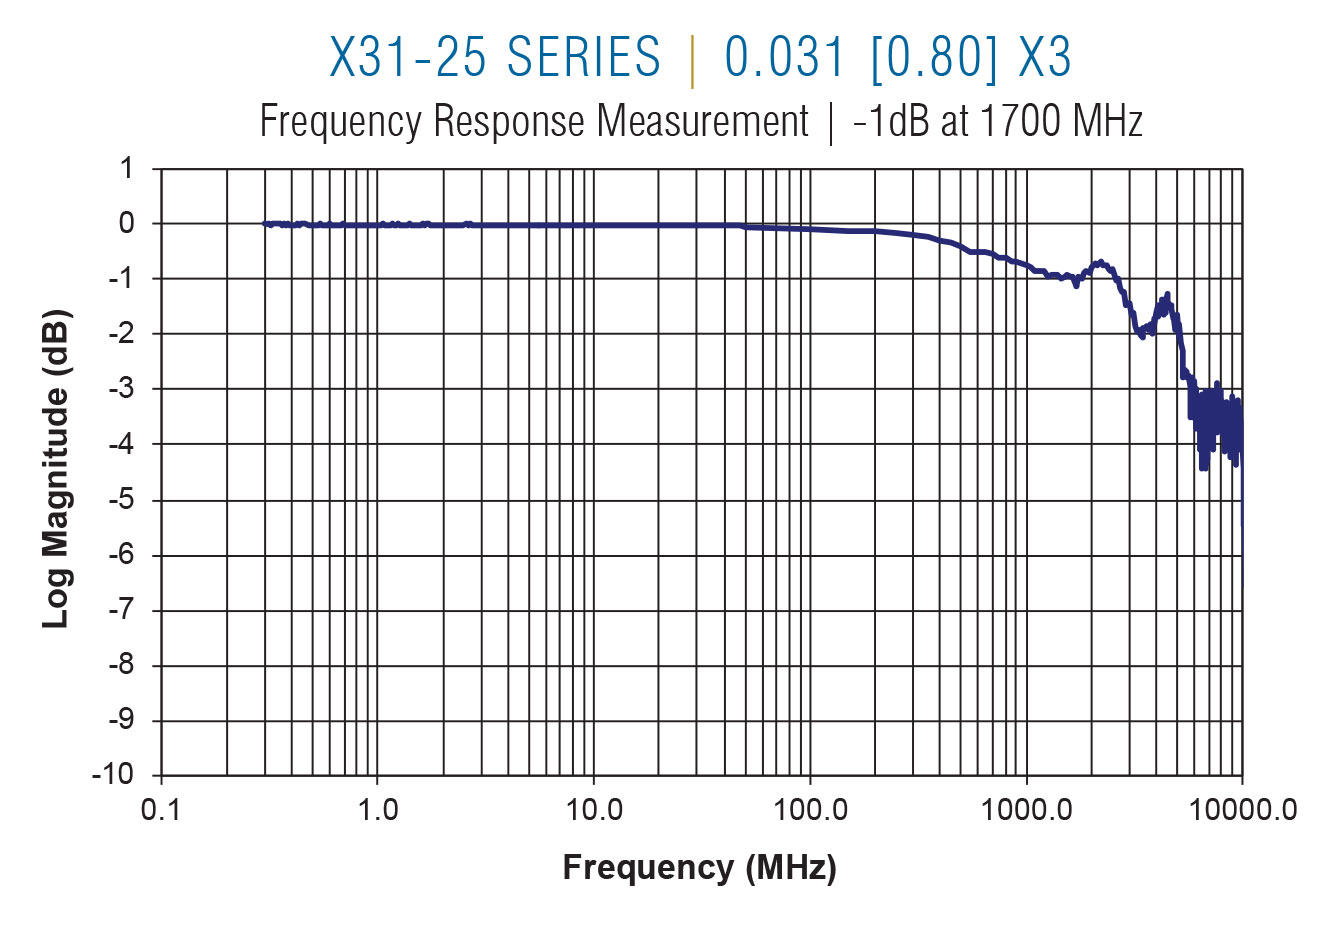 X31-25 Frequency on 0.031 centers x3